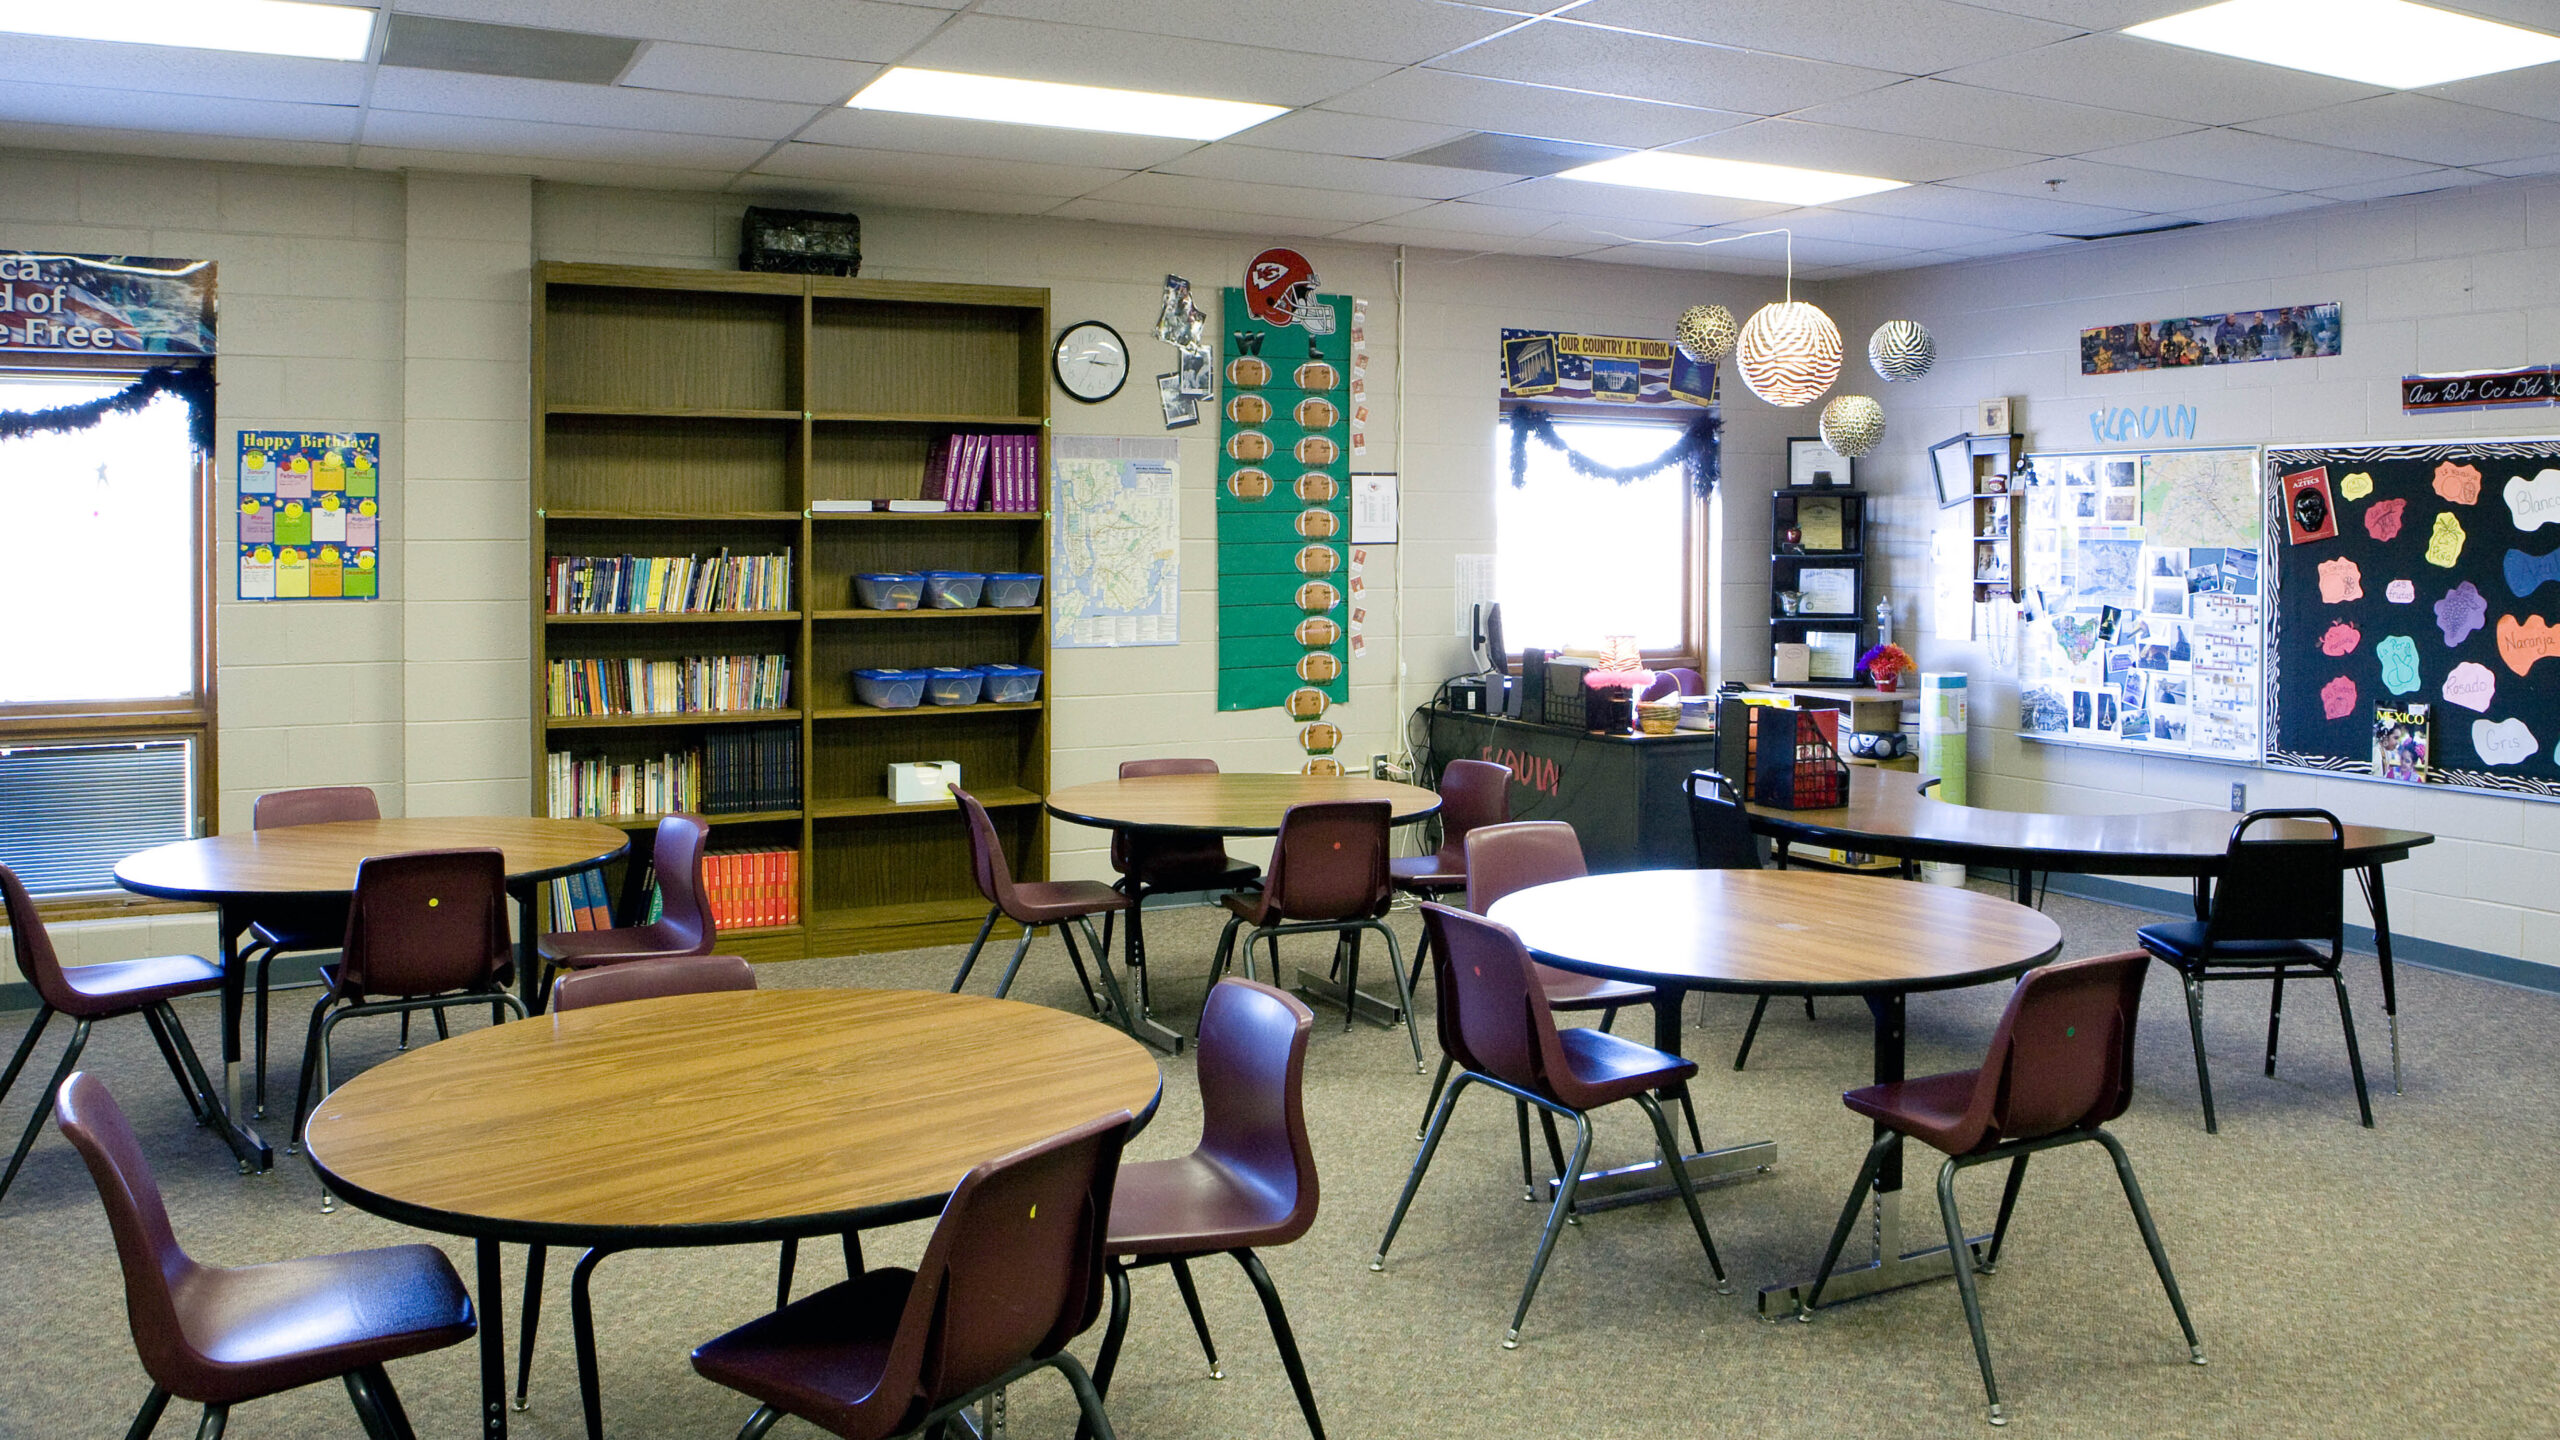 classroom with round tables, chairs, and shelving